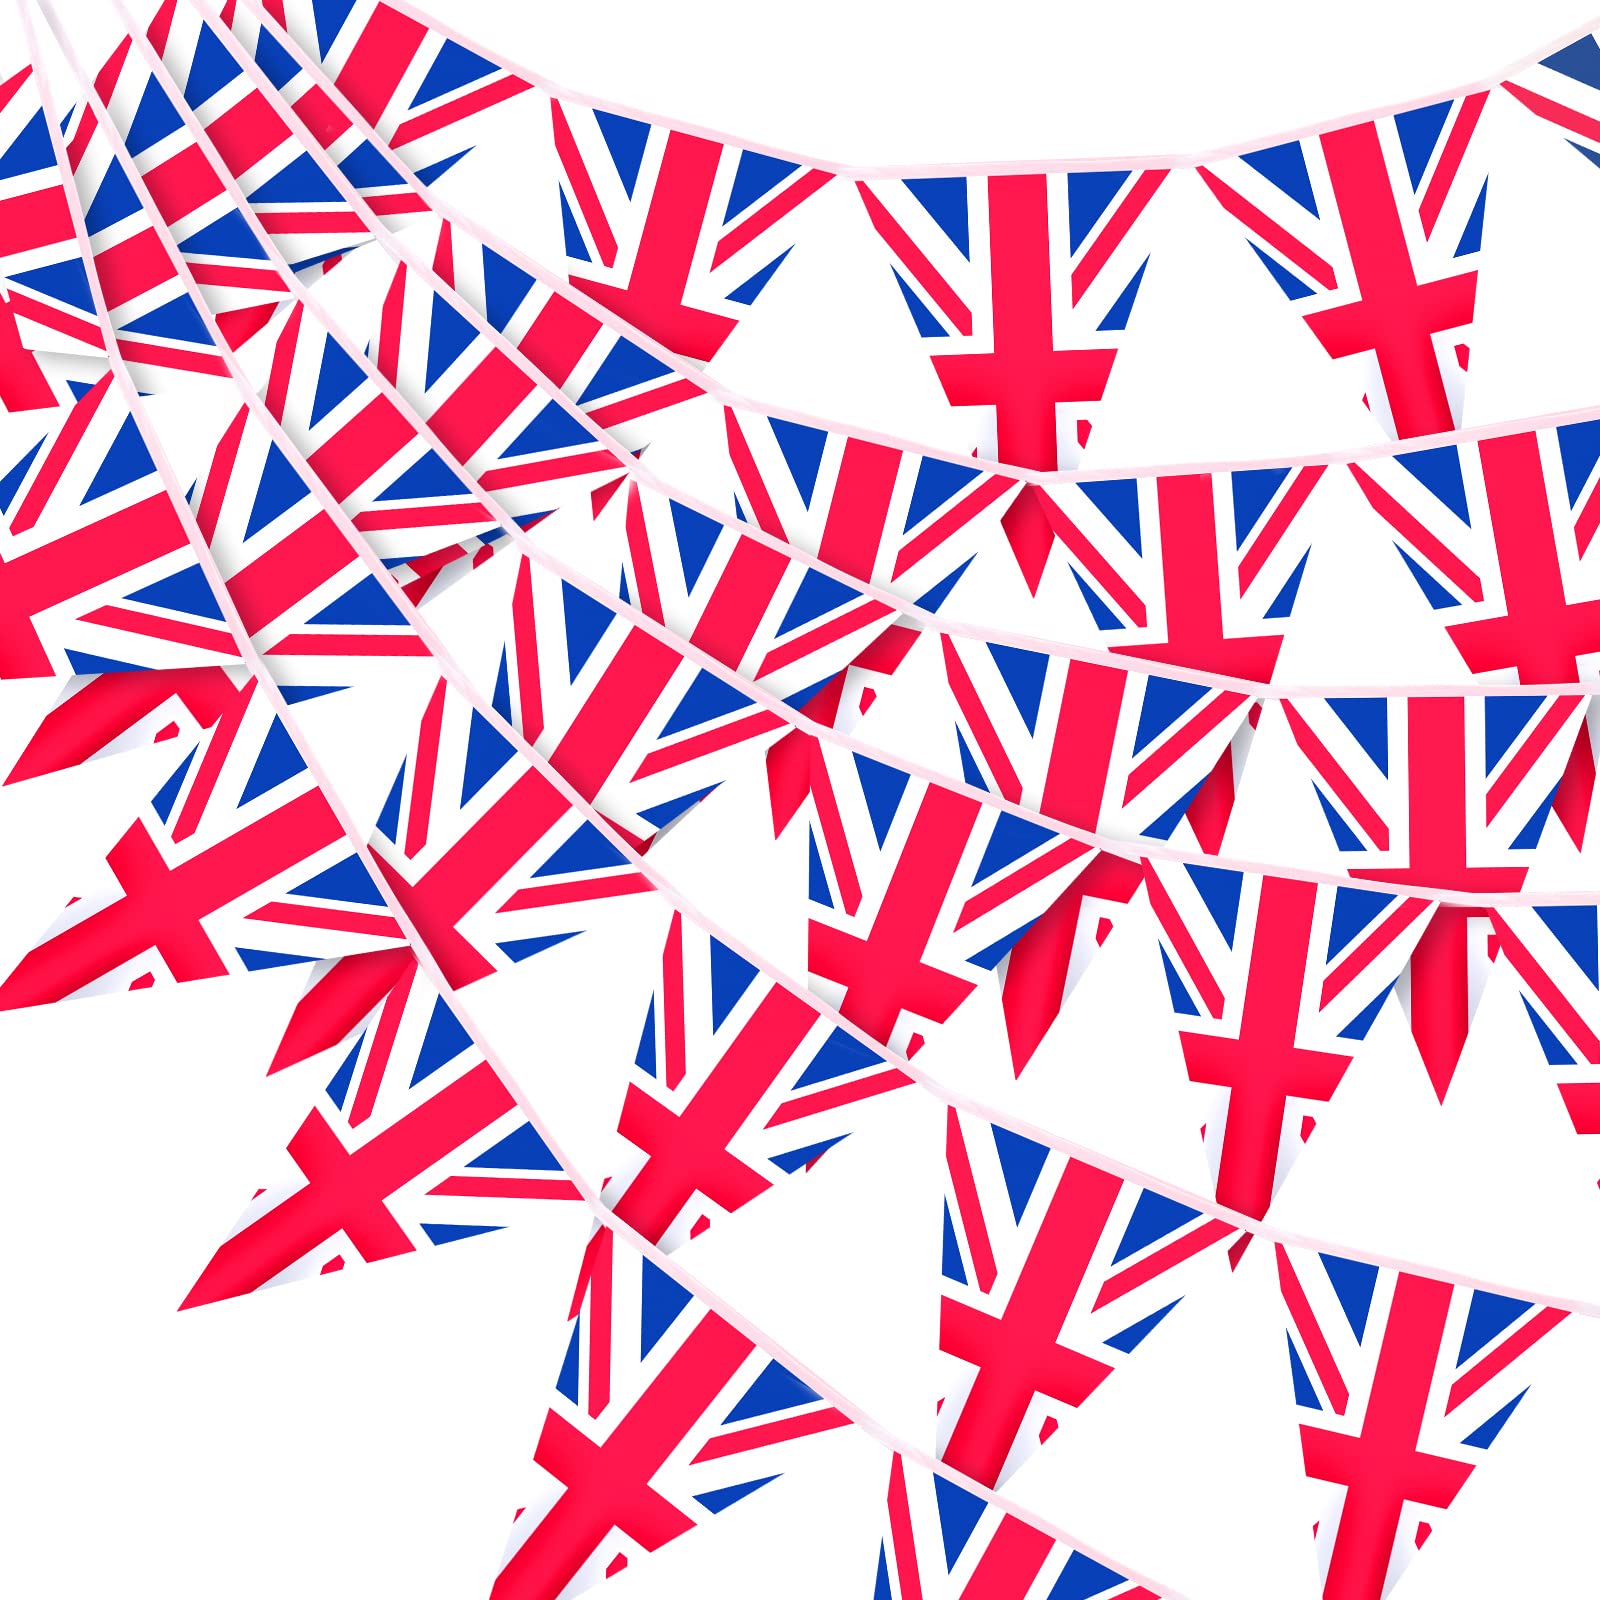 30 X G2PLUS 10M UNION JACK FLAG BUNTING, 30 PCS BRITISH BUNTING BANNER, REUSABLE UK GARDEN BUNTING, 20X28CM FOR QUEEN'S BIRTHDAY CELEBRATING DECORATION - TOTAL RRP £215: LOCATION - A RACK